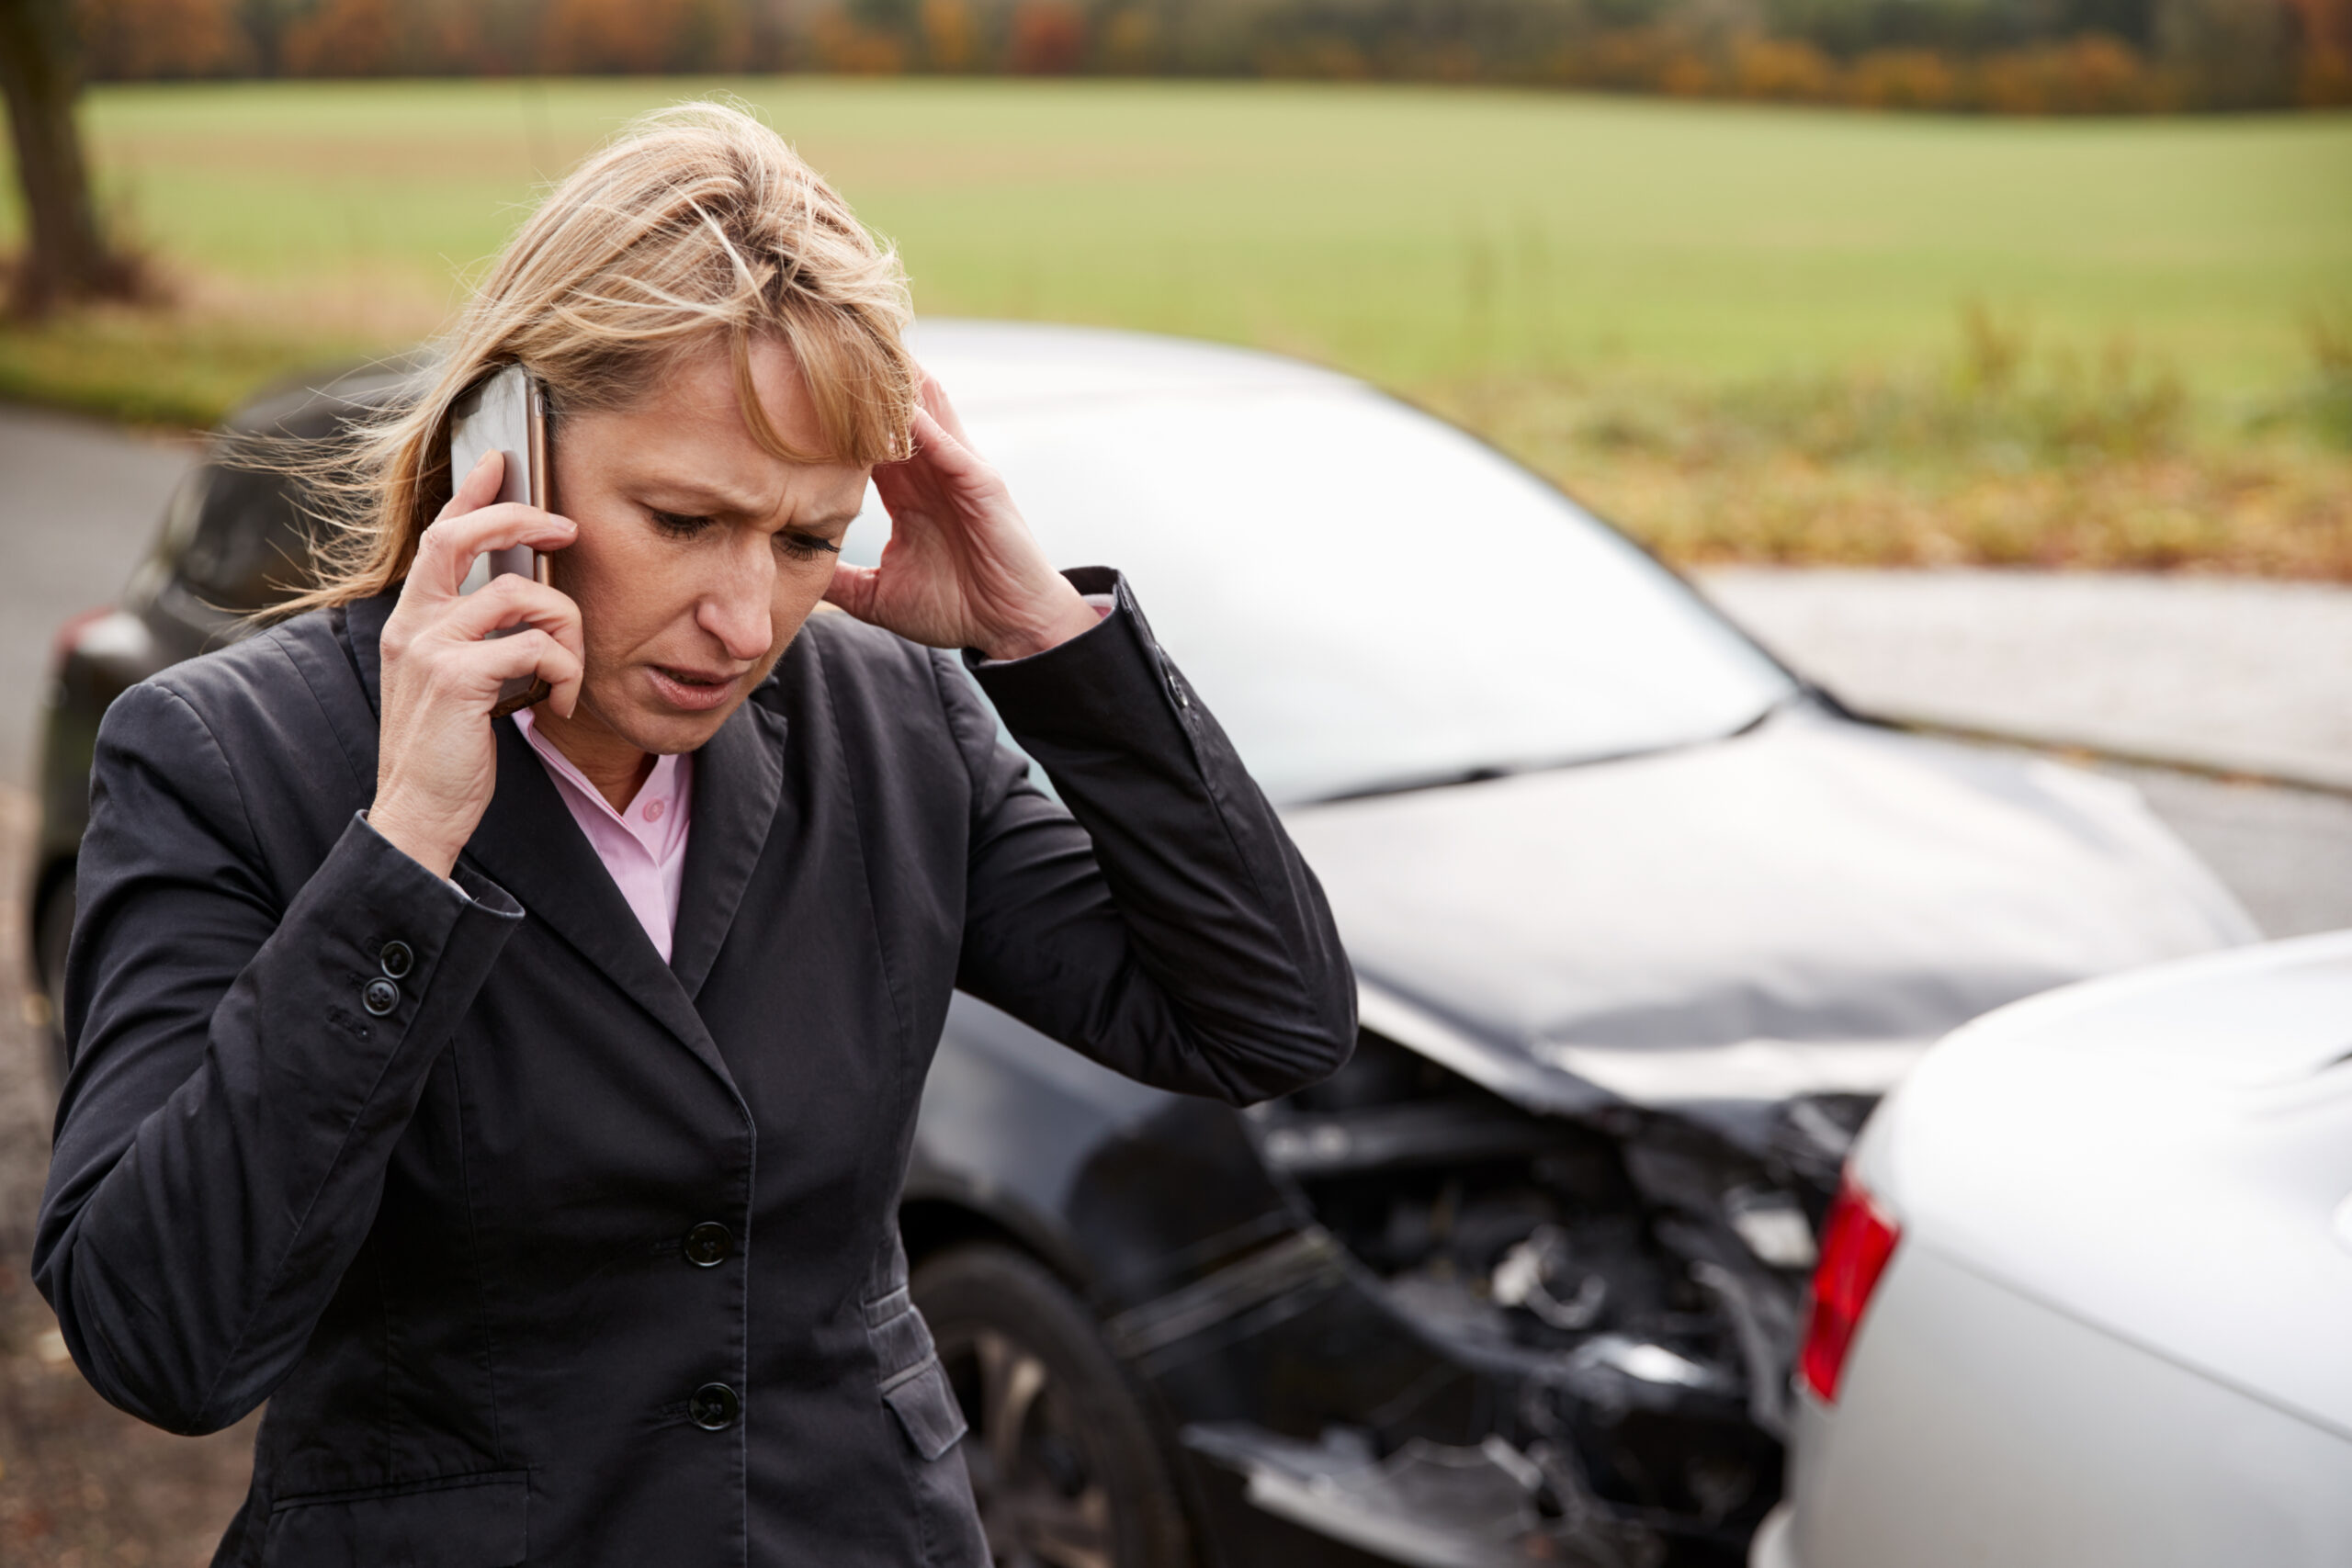 Types of Damages You Can Claim in a Southwest Florida Car Accident Case